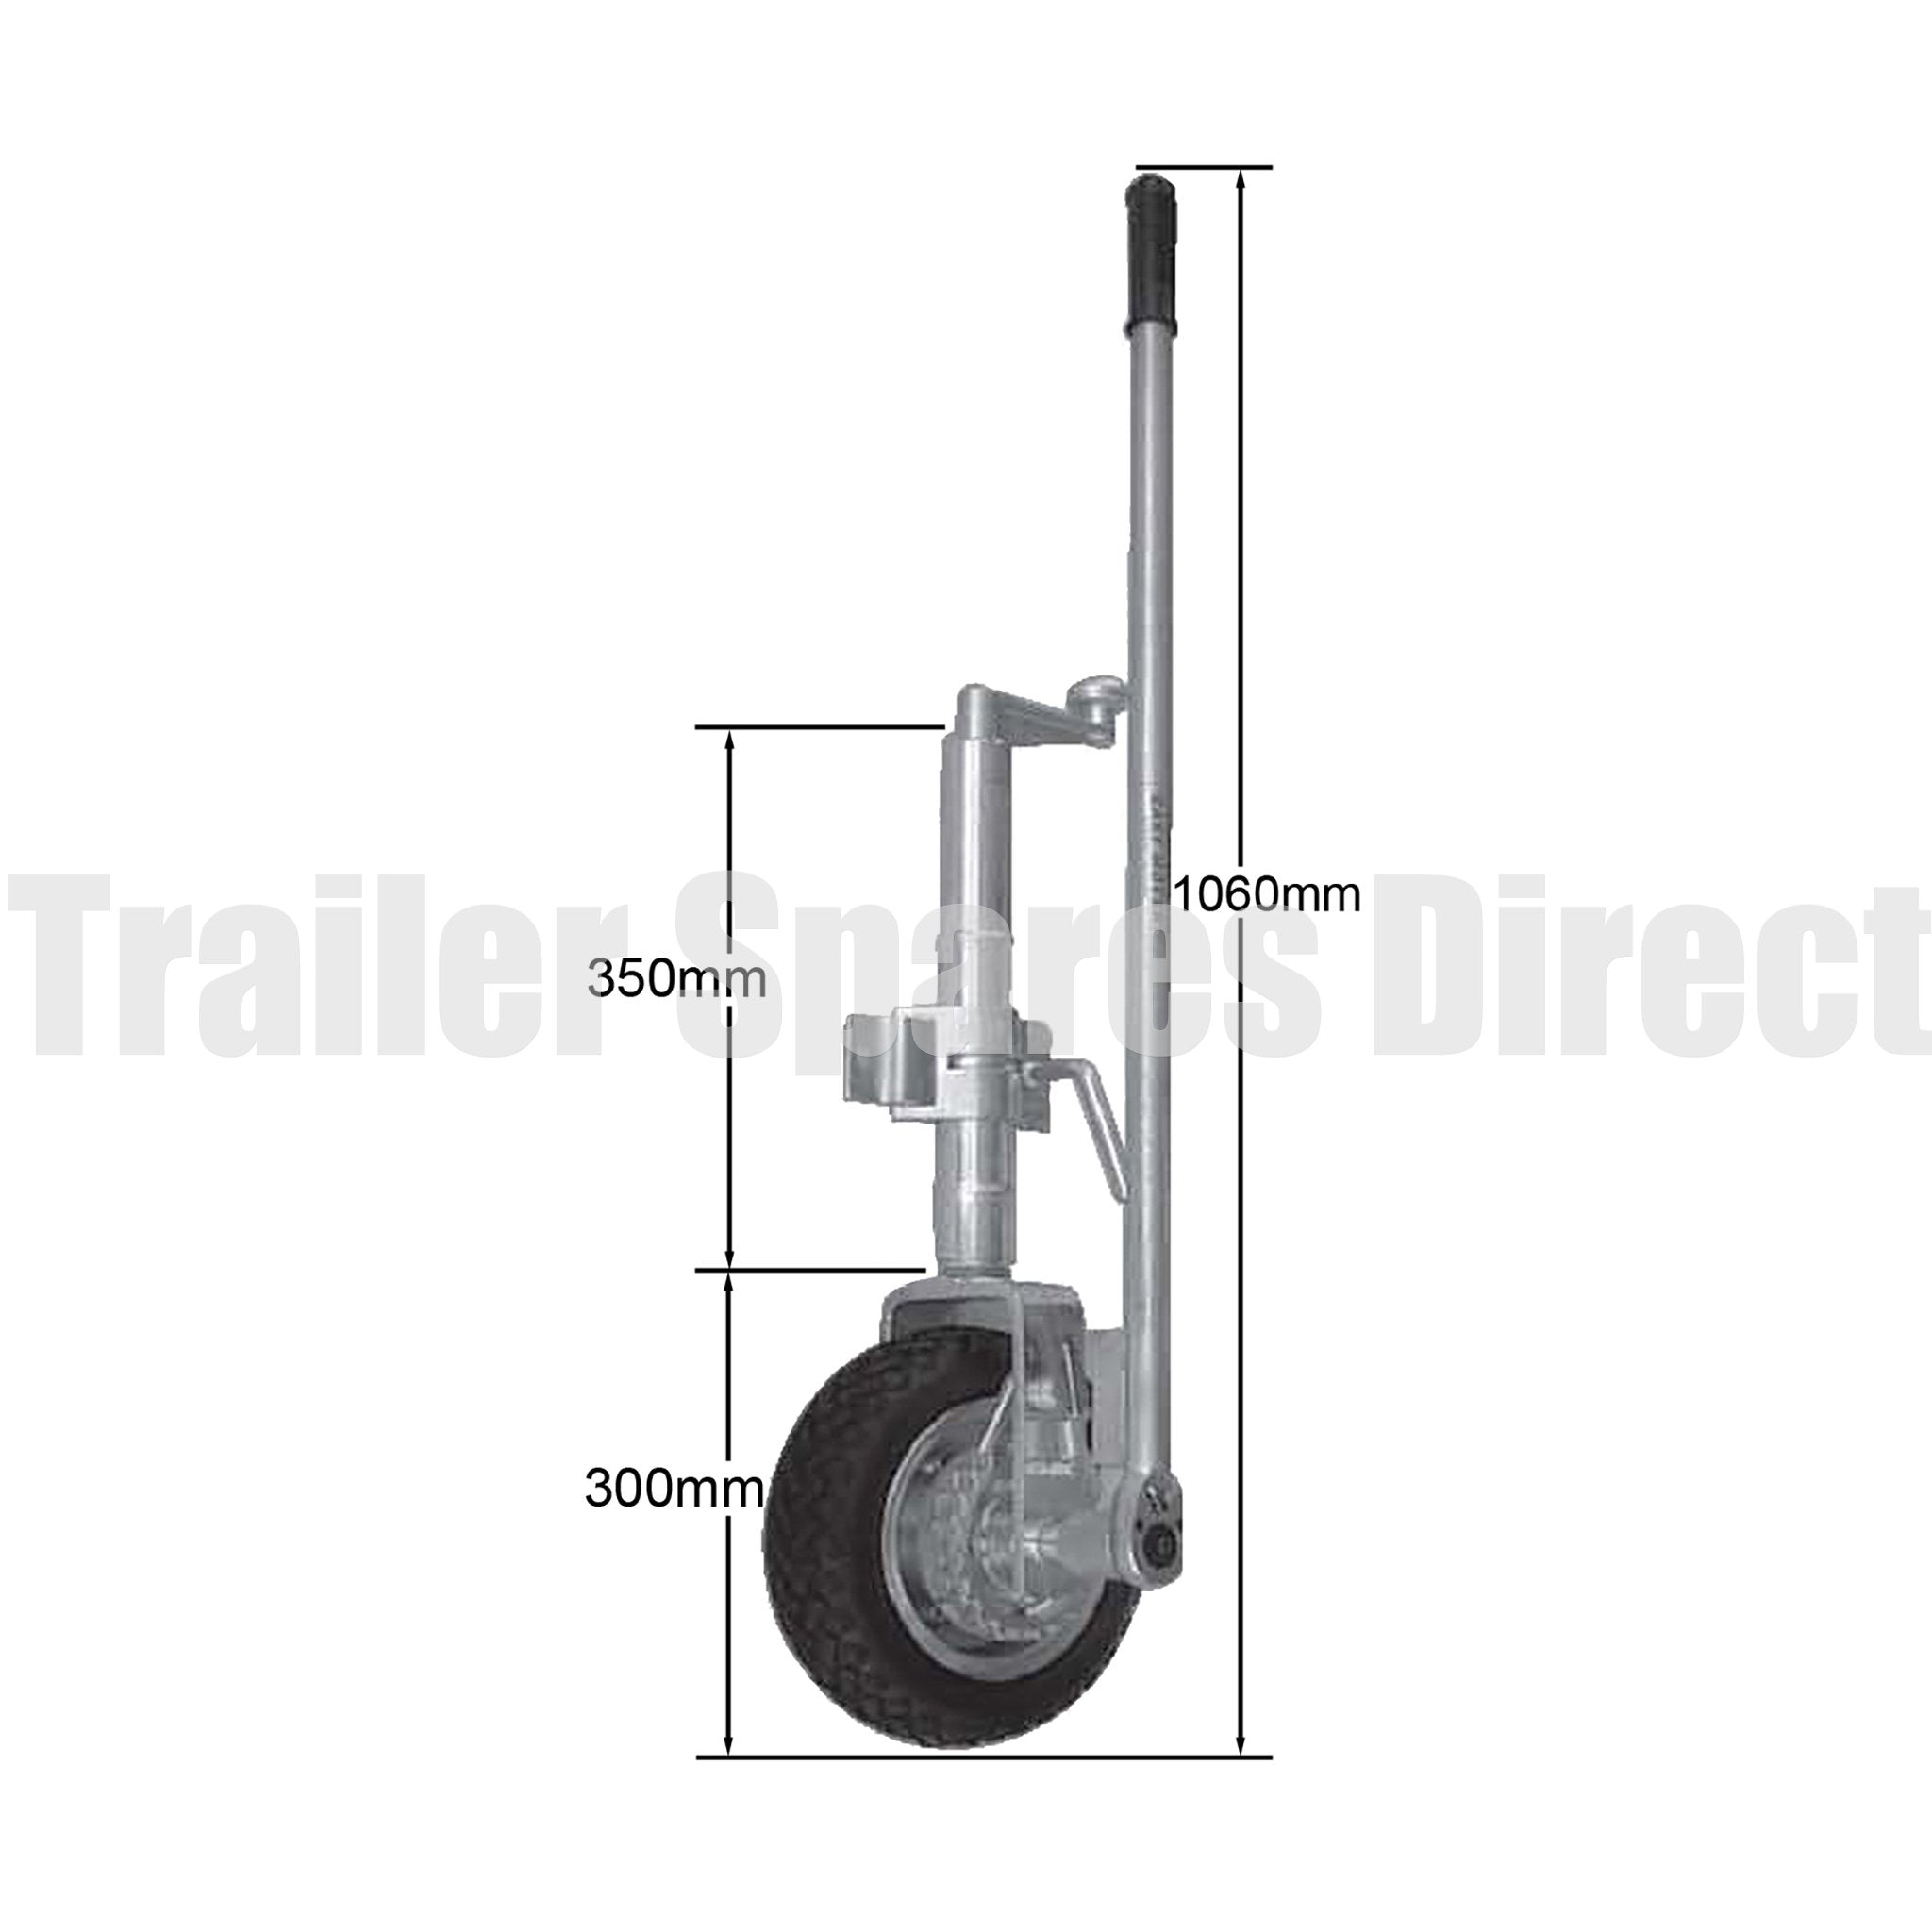 10 inch ratchet driven solid rubber jockey wheel with clamp